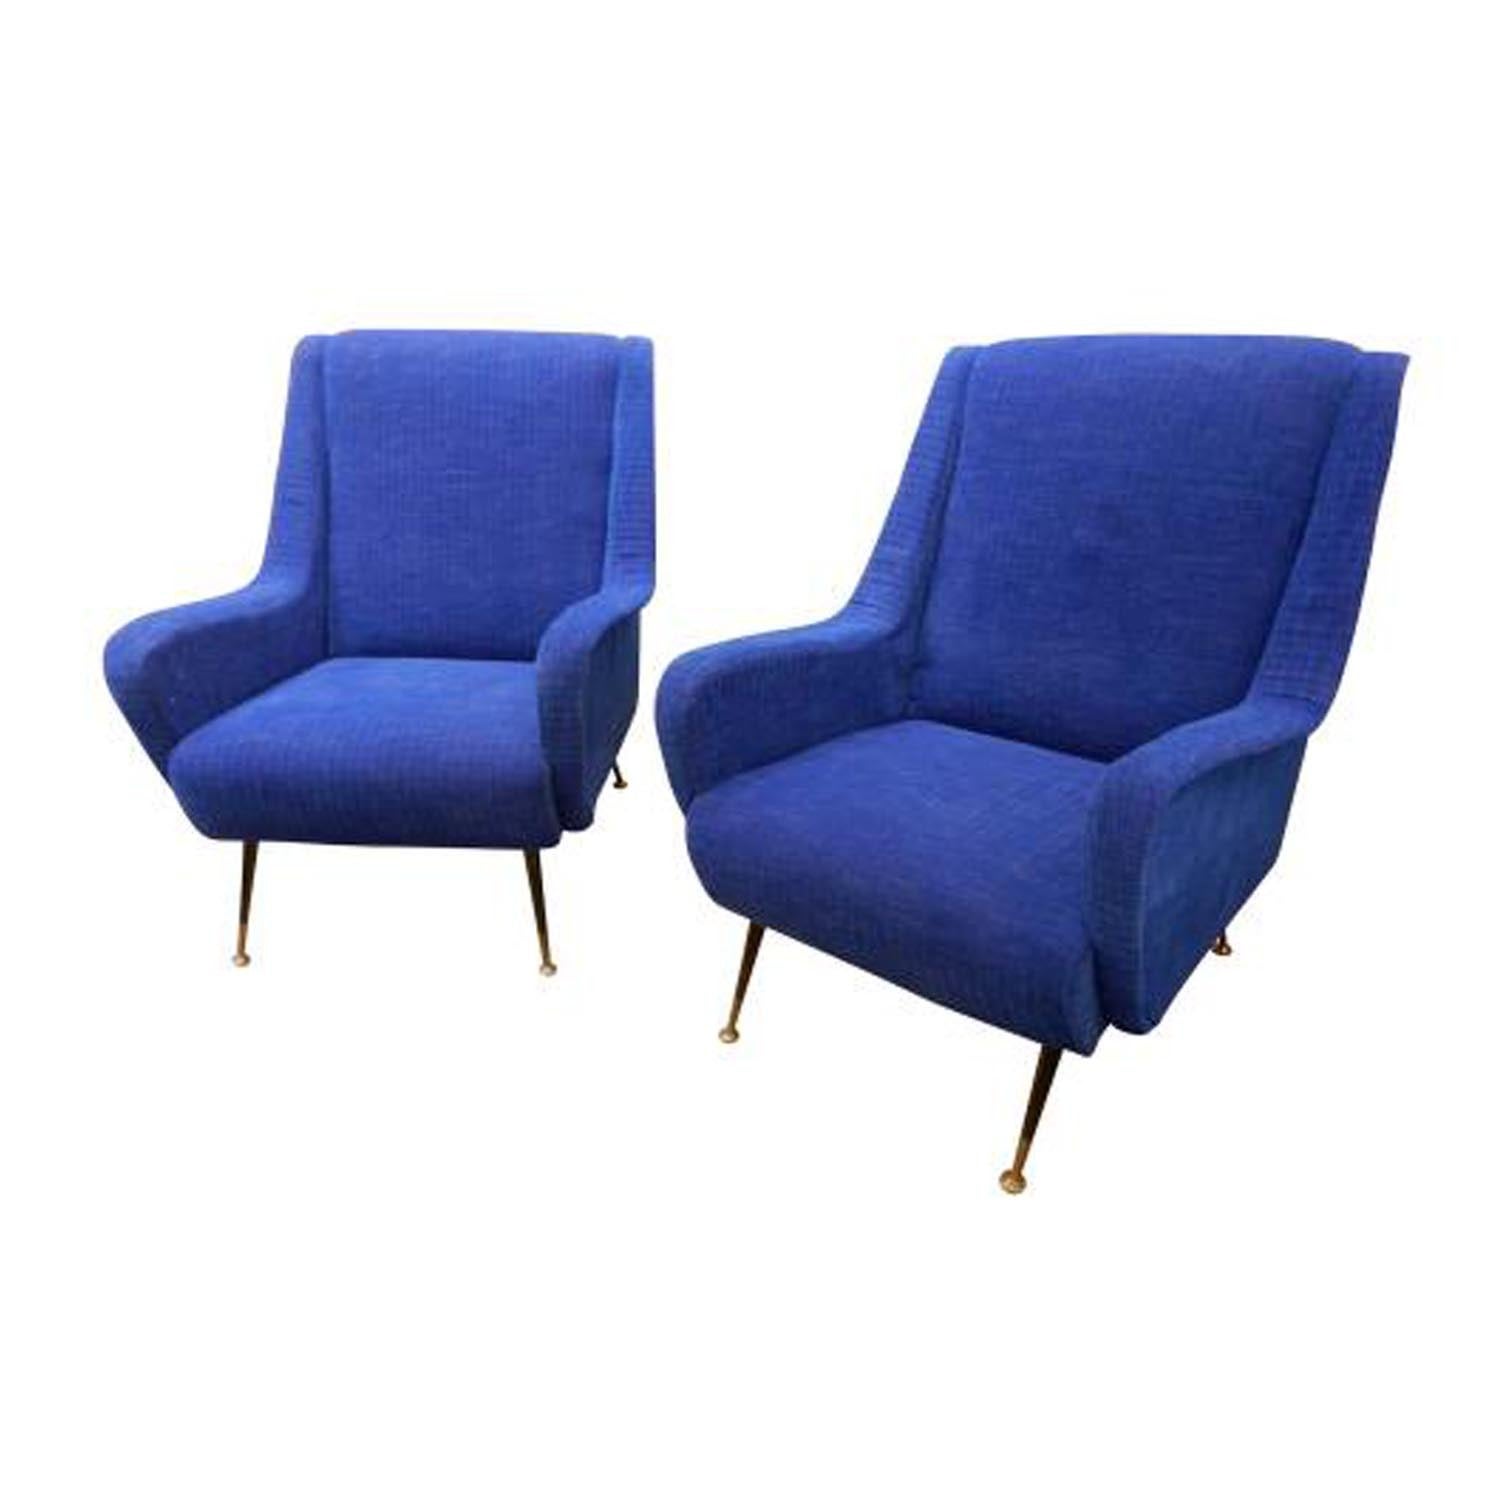 Pair of Mid-Century Modernist Club Chairs in the Style of Marco Zanuso